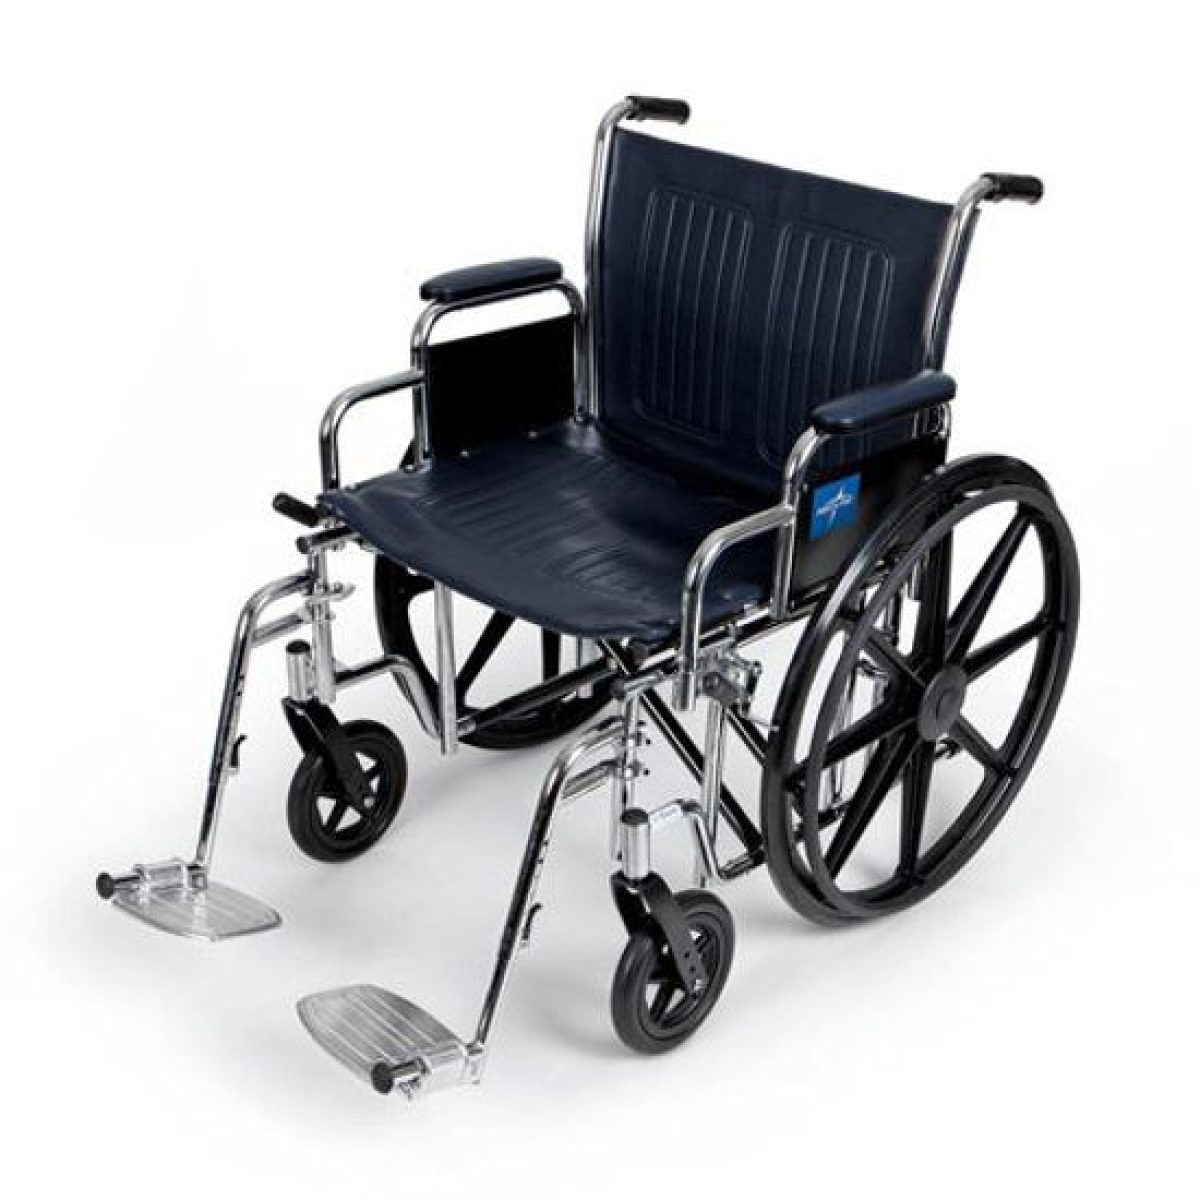 Excel Extra-Wide Bariatric Wheelchair – Weight capacity 500 lbs